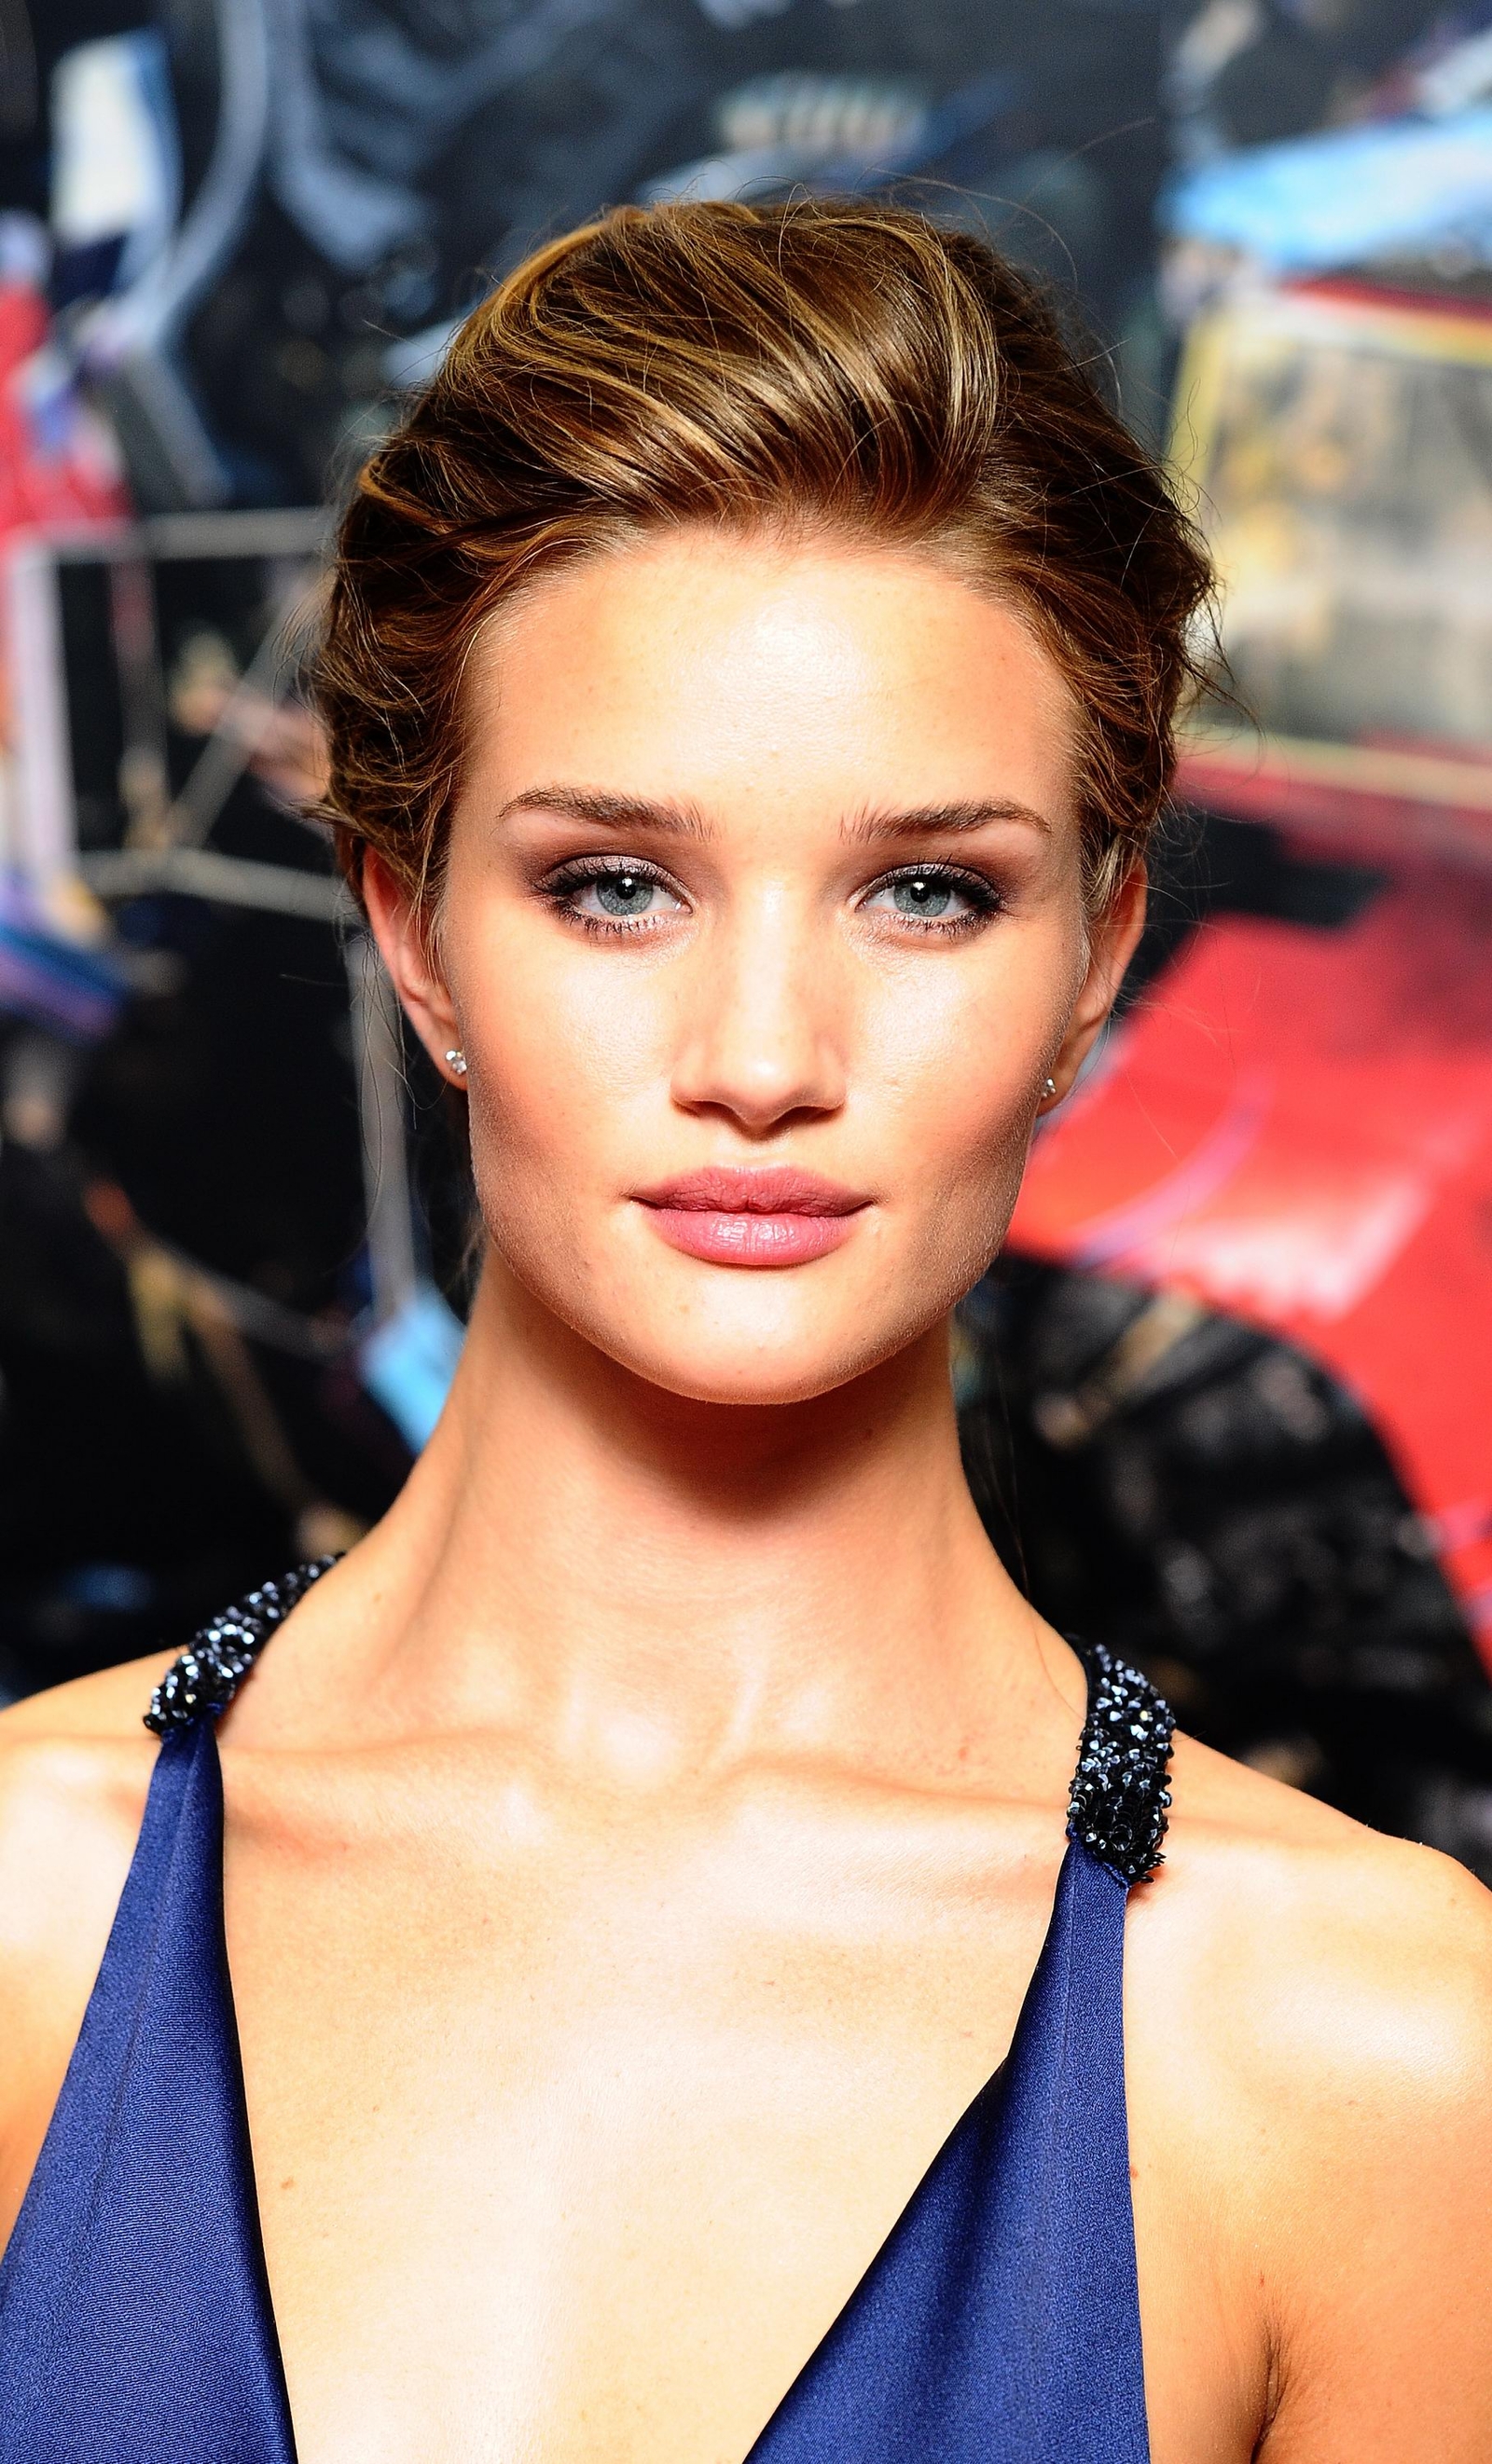 Rosie Huntington-Whiteley at Transformers 3 Premiere in London-07 ...